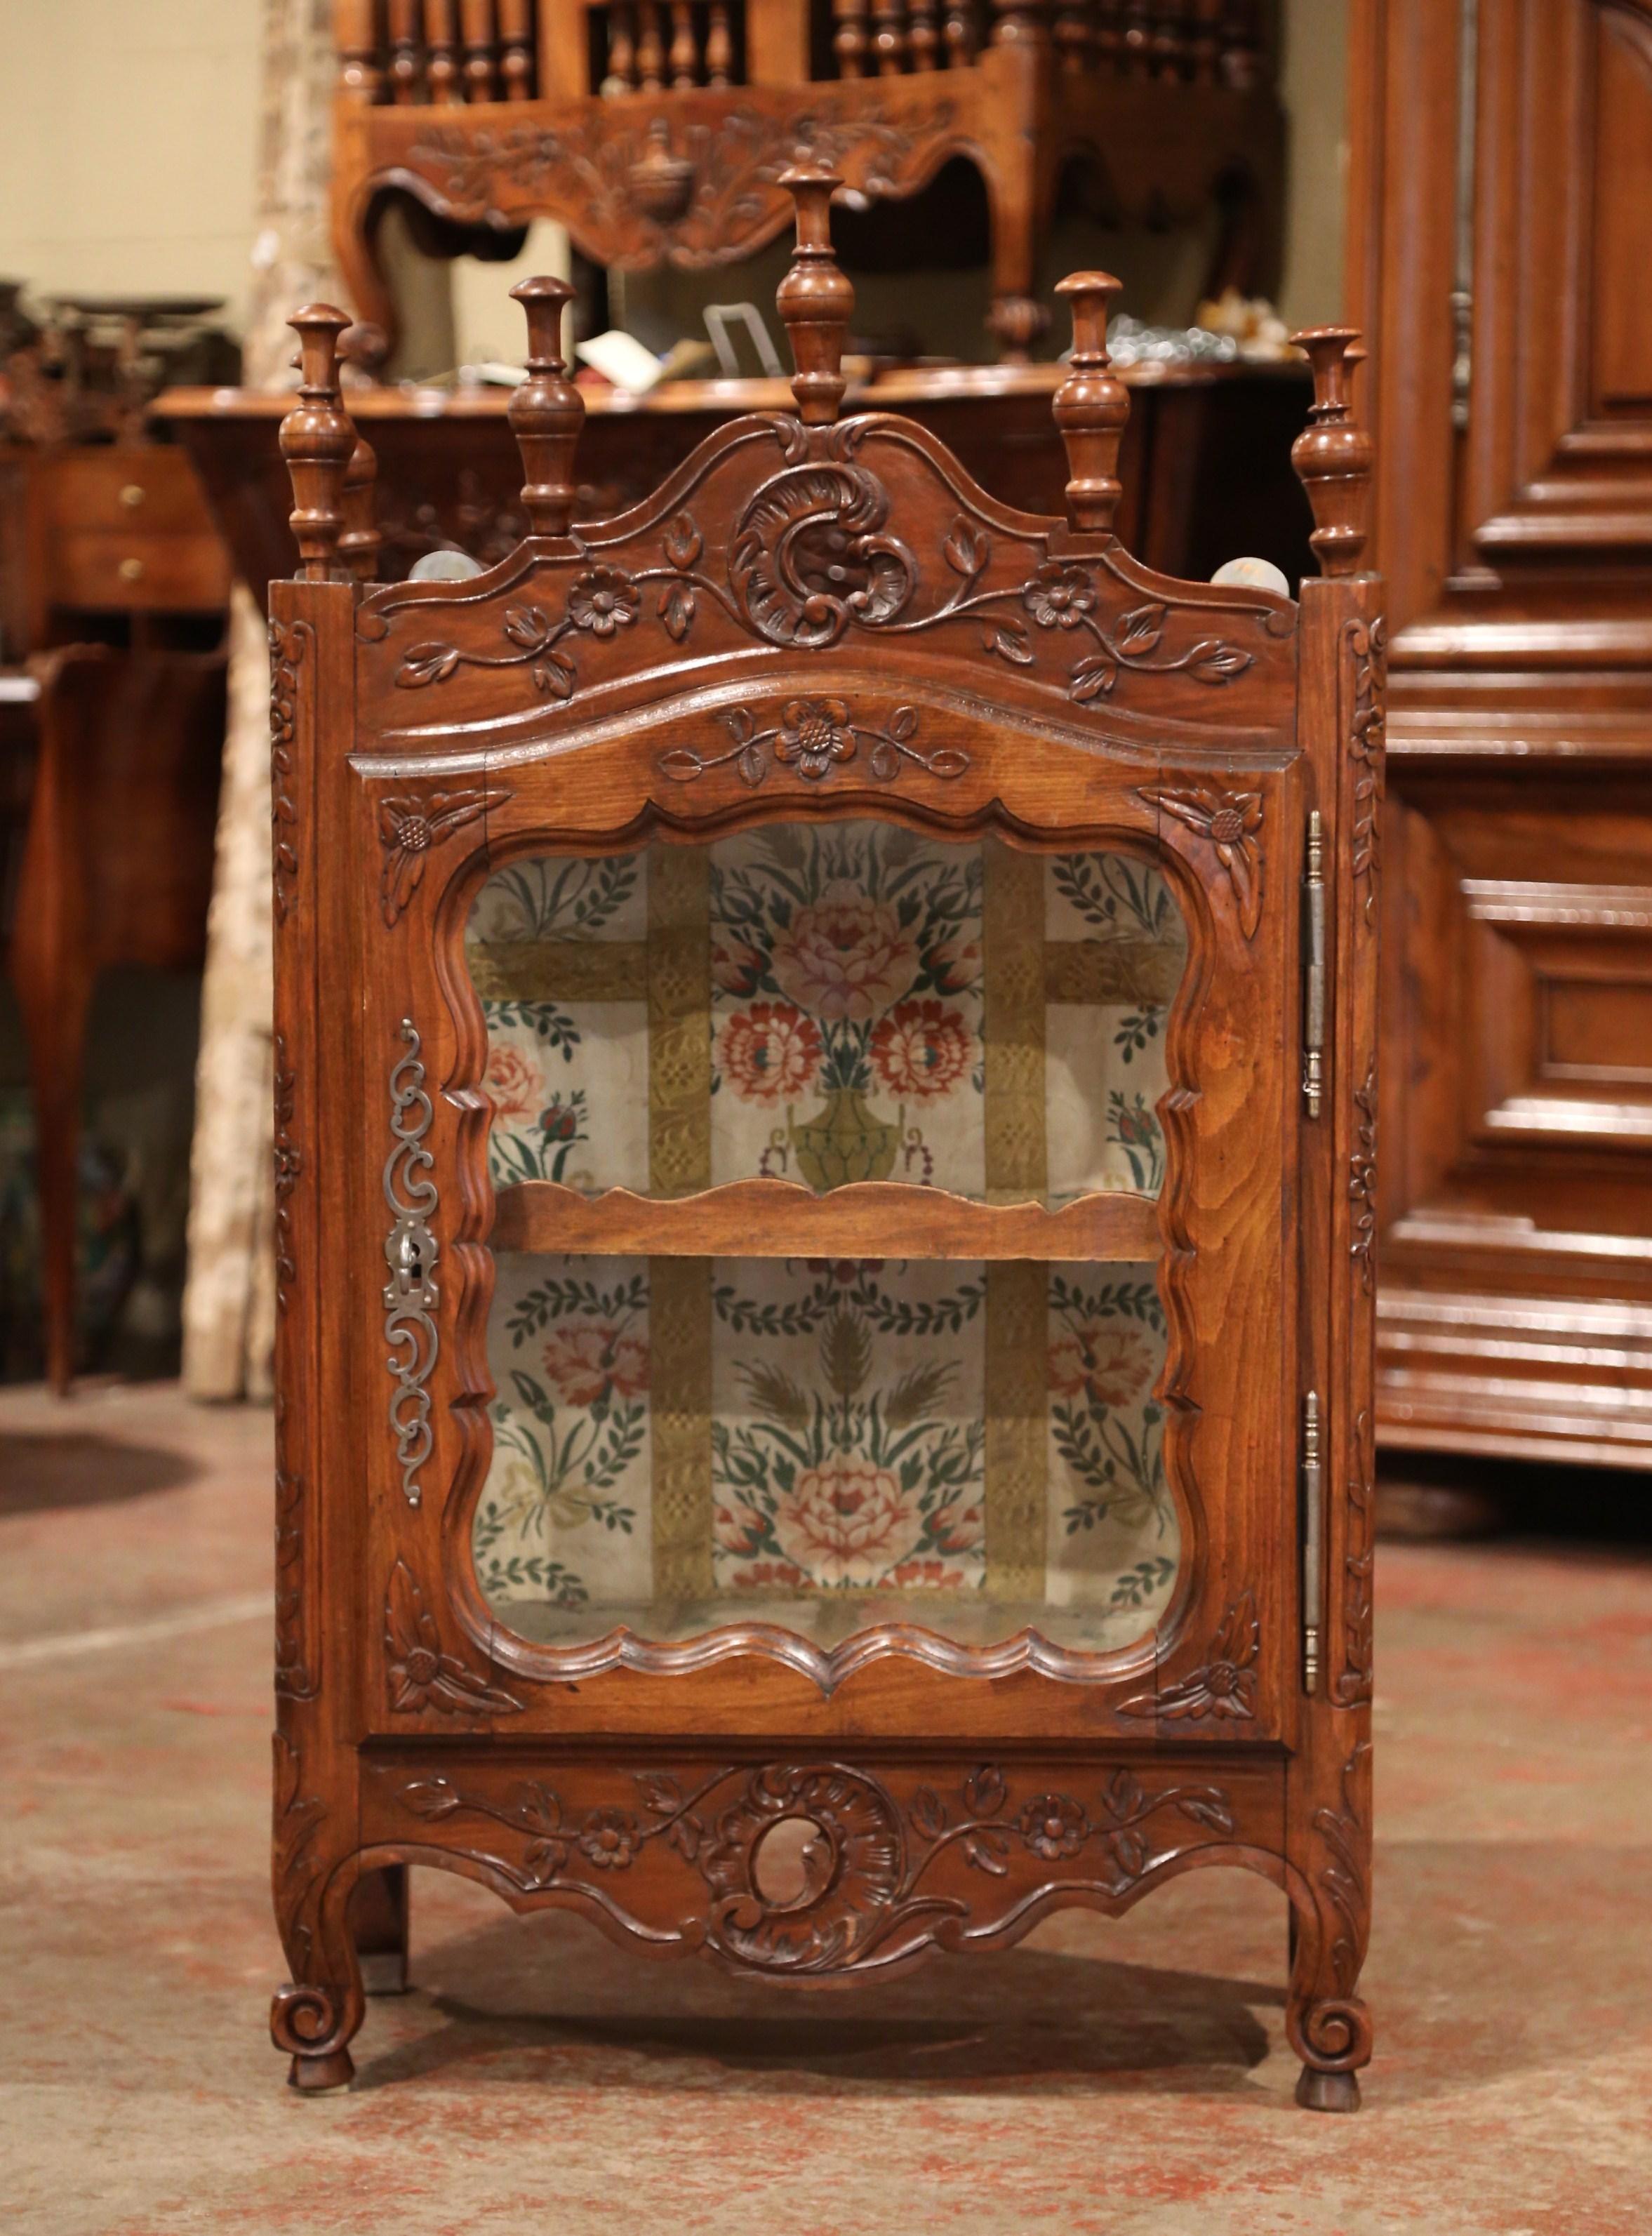 This elegant antique vitrine was crafted in southern France, circa 1880. The petite fruit wood cabinet has a carved and pierced bonnet top embellished with decorative turned finials around the pediment. The vitrine has three sides with clear glass